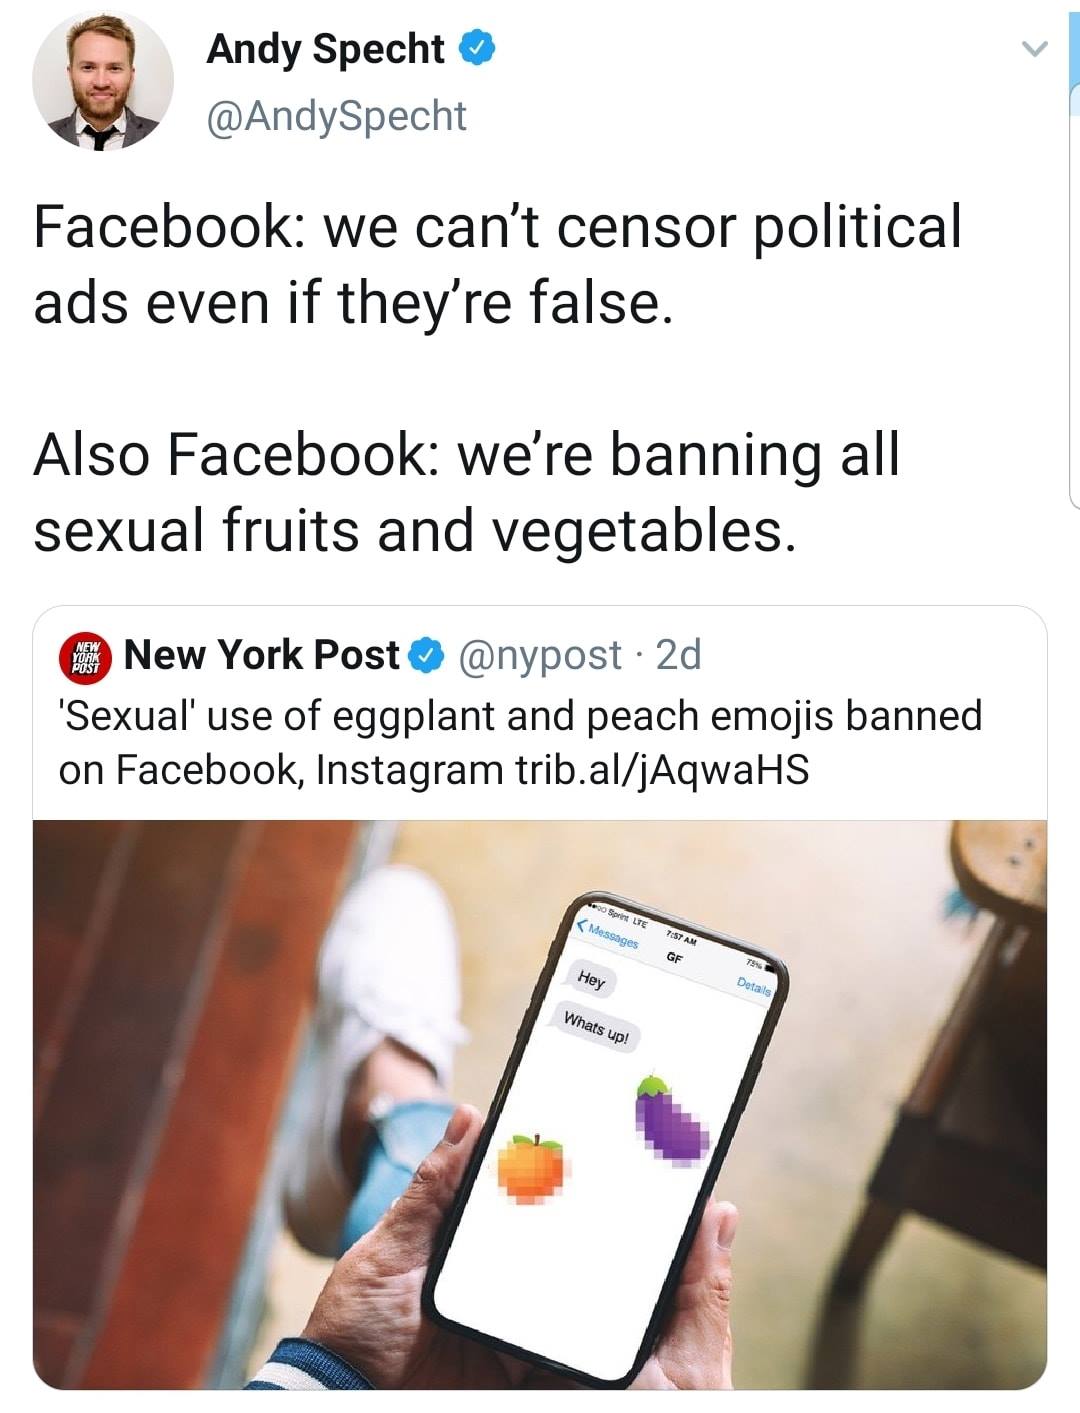 political political-memes political text: Andy Specht e @AndySpecht Facebook: we can't censor political ads even if they're false. Also Facebook: we're banning all sexual fruits and vegetables. O New York Poste @nypost • 2d 'Sexual' use of eggplant and peach emojis banned on Facebook, Instagram trib.al/jAqwaHS 